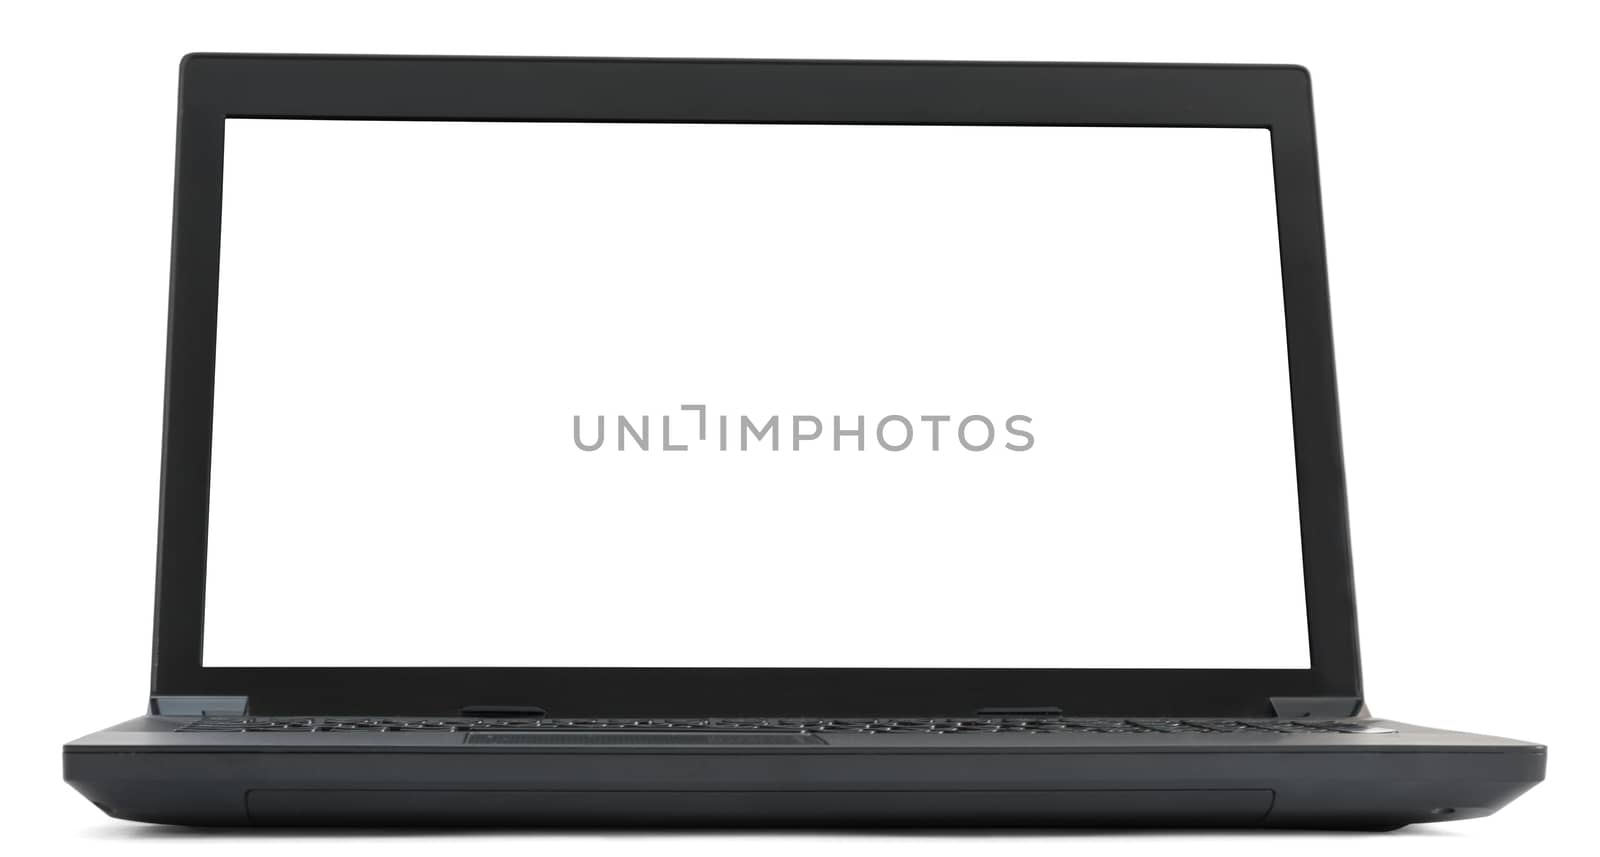 Laptop on isolated white background, front view